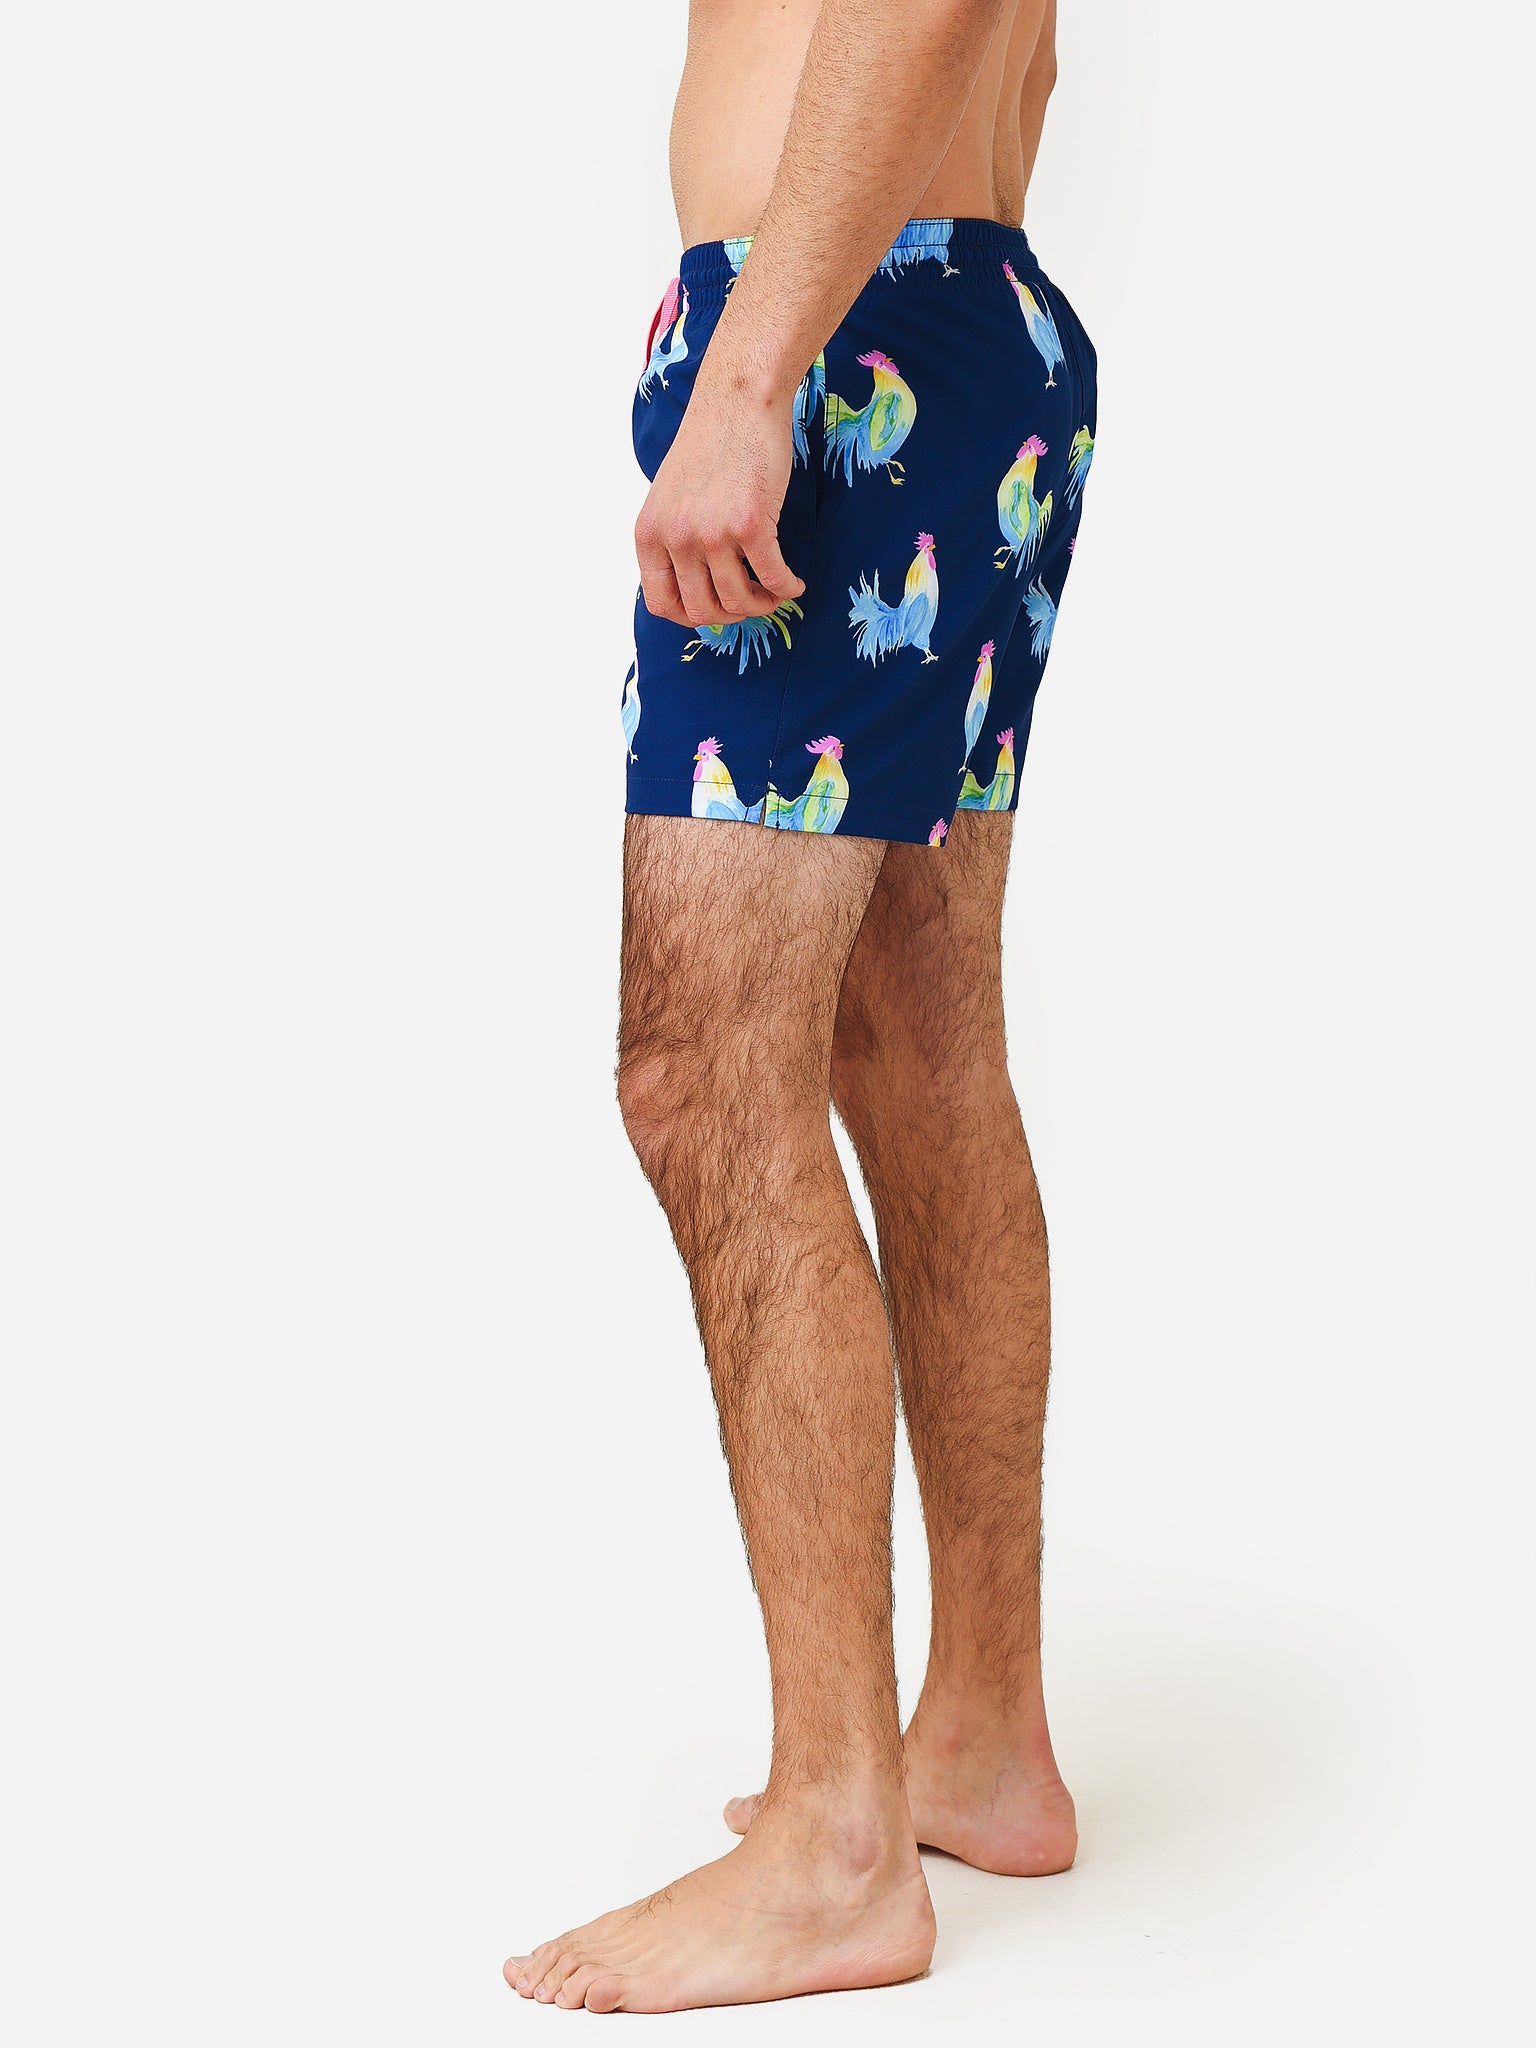 Men's Chubbies The Fowl Plays 5.5-inch Swim Trunks - Large / Navy